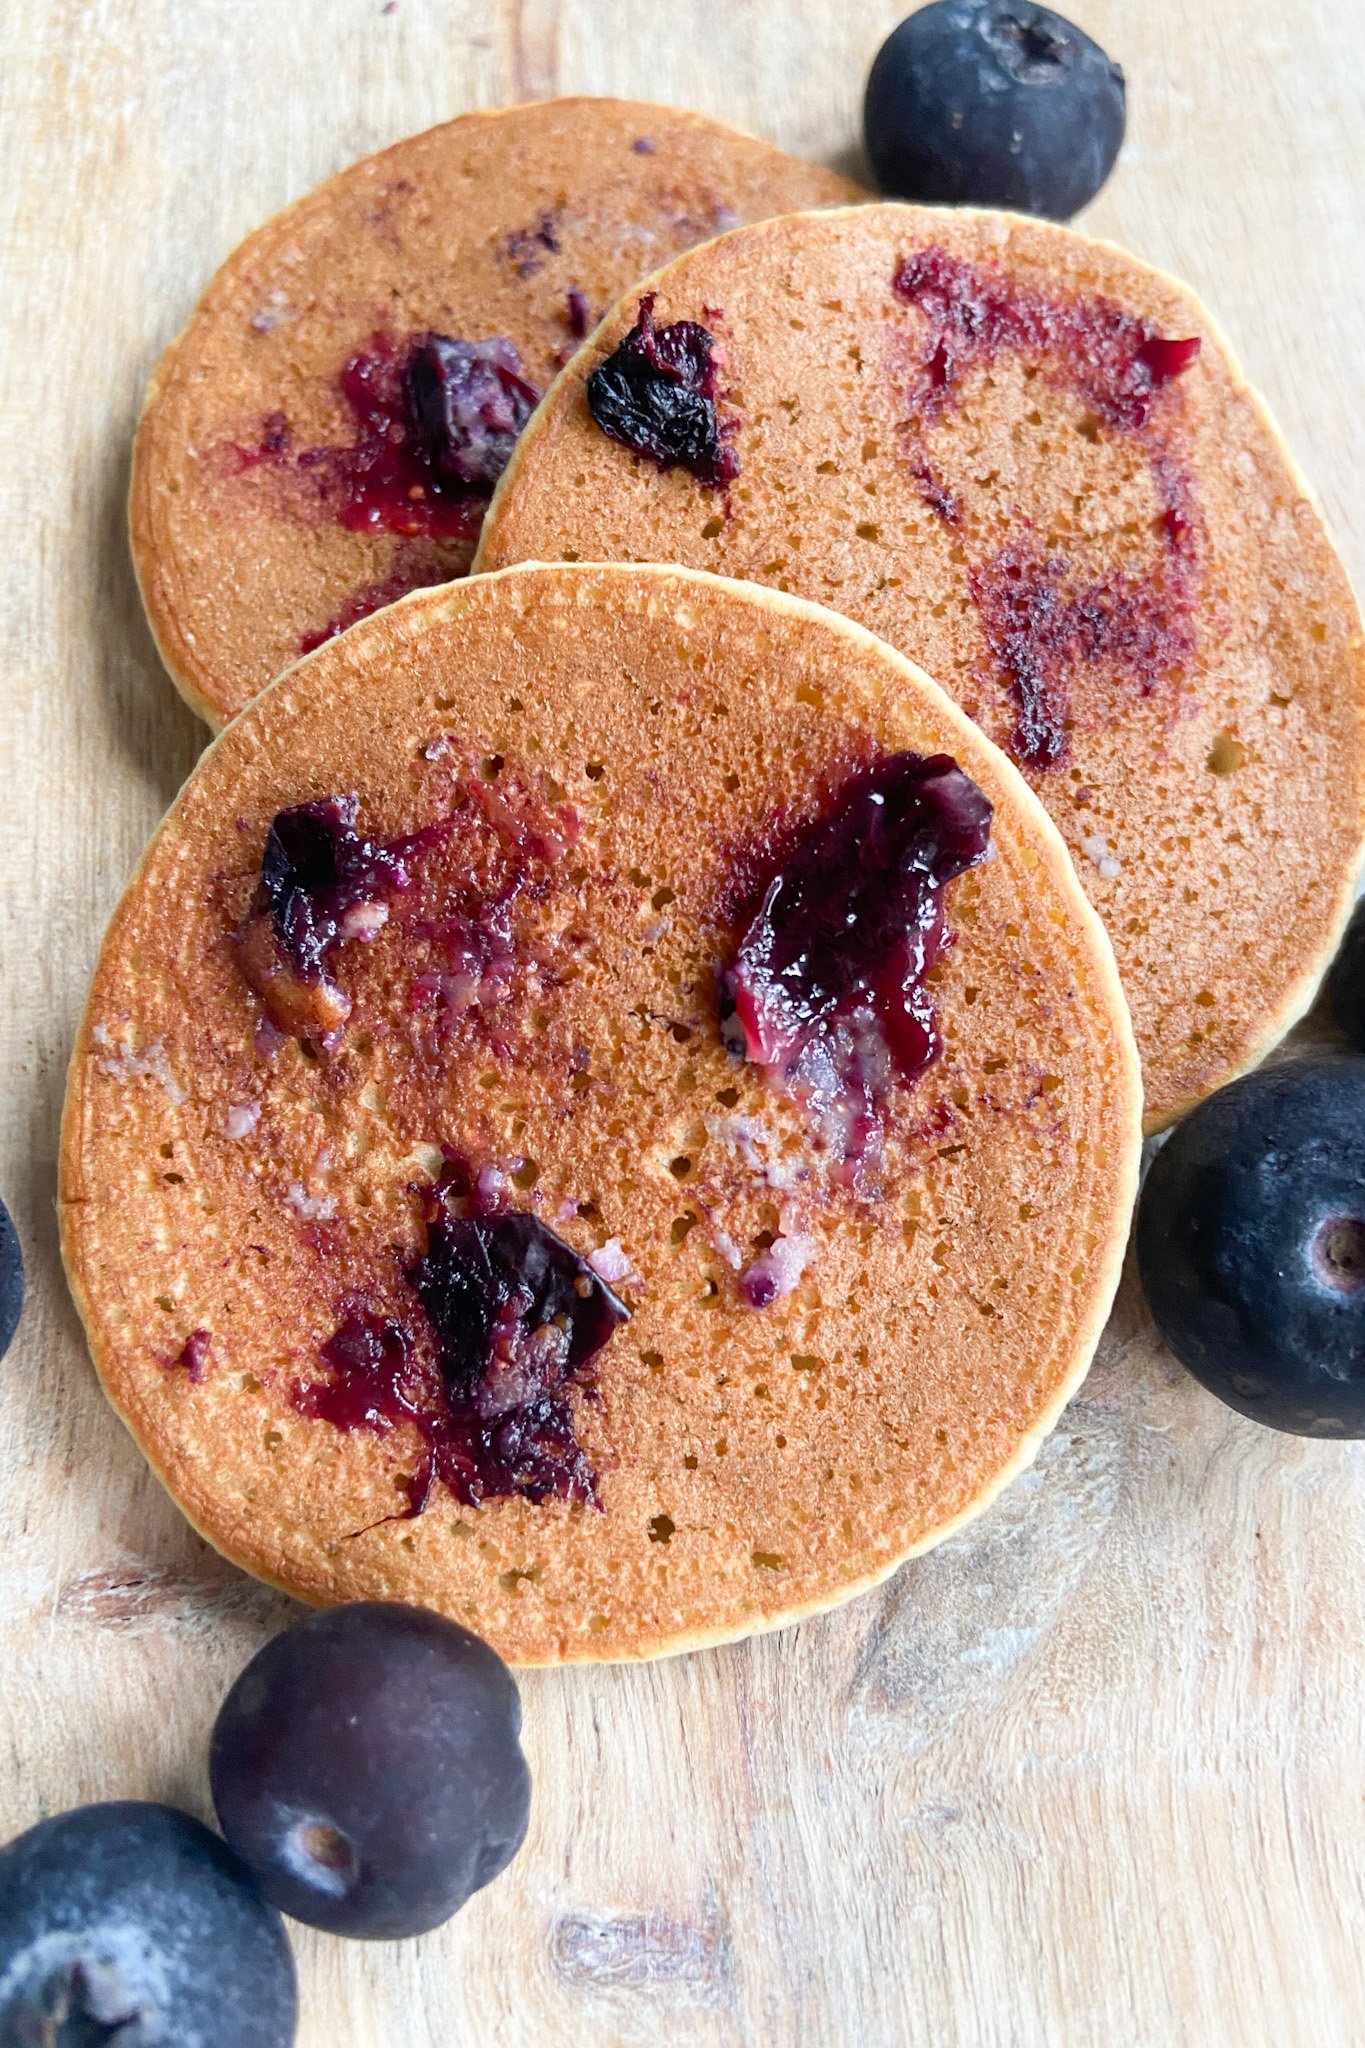 Blueberry oat pancakes served with blueberries